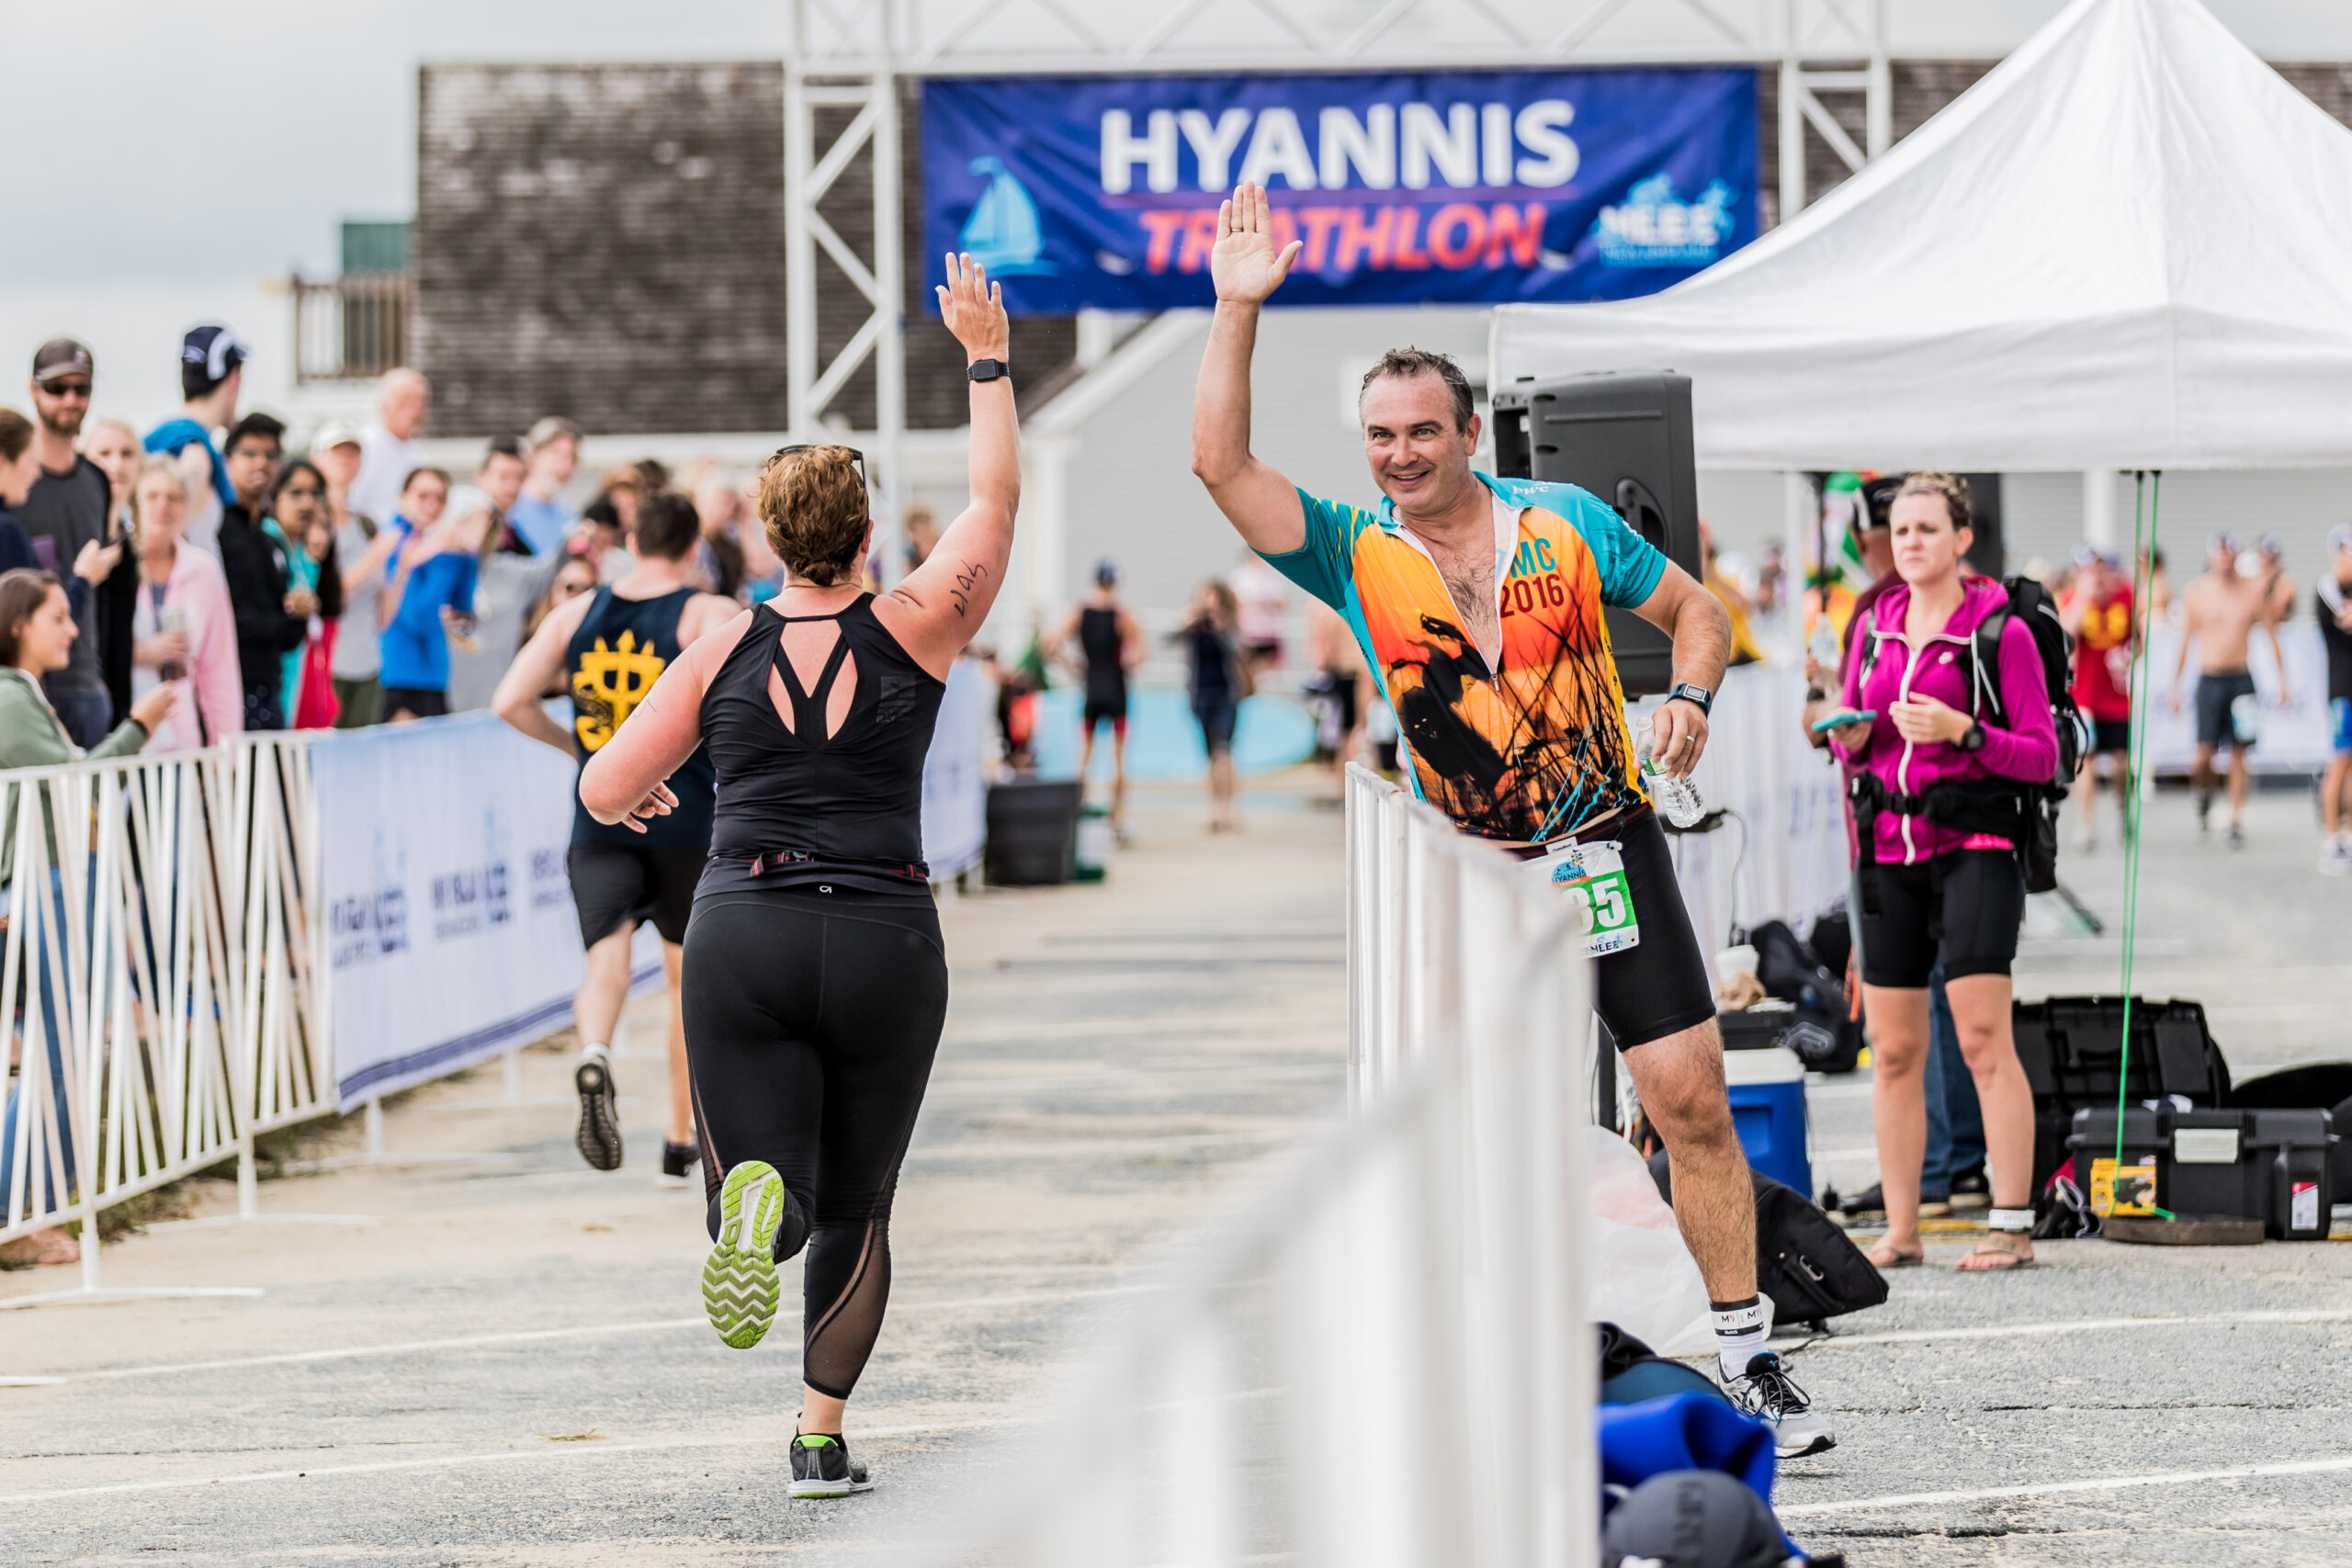 New England Endurance Events encourages triathletes to research prior to prepping for a triathlon.